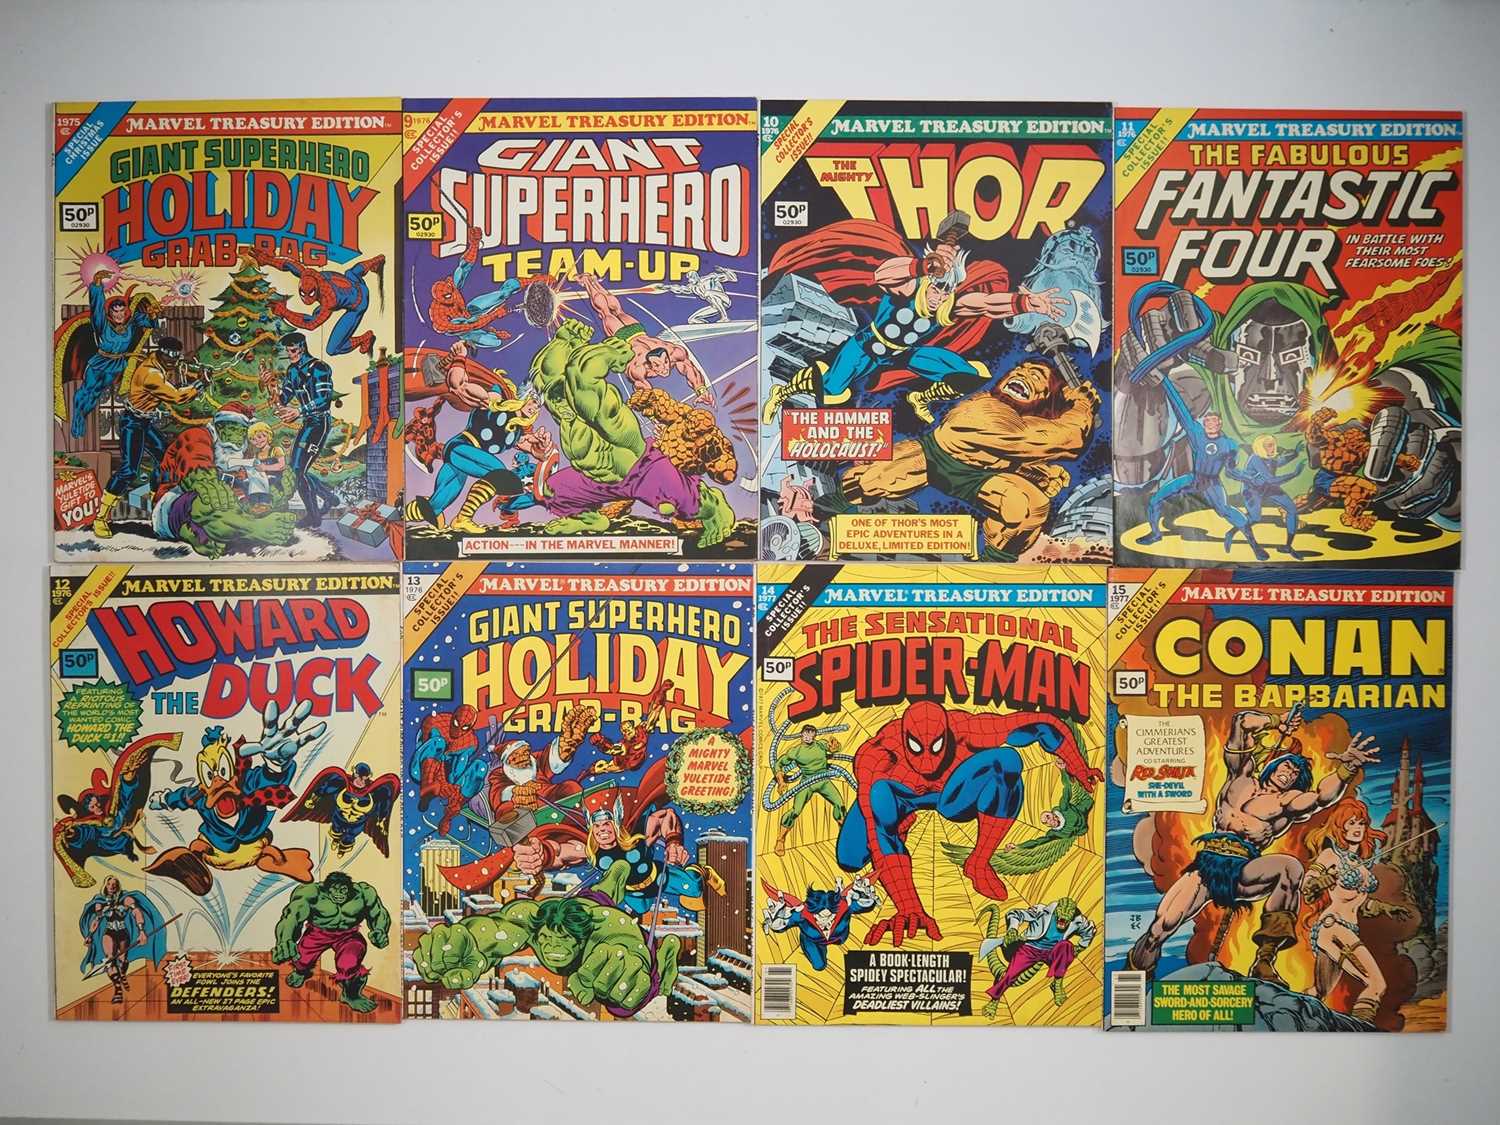 MARVEL TREASURY EDITION LOT (8 in Lot) - (1976/1977 - MARVEL - UK Price Variant) - Includes issues 8